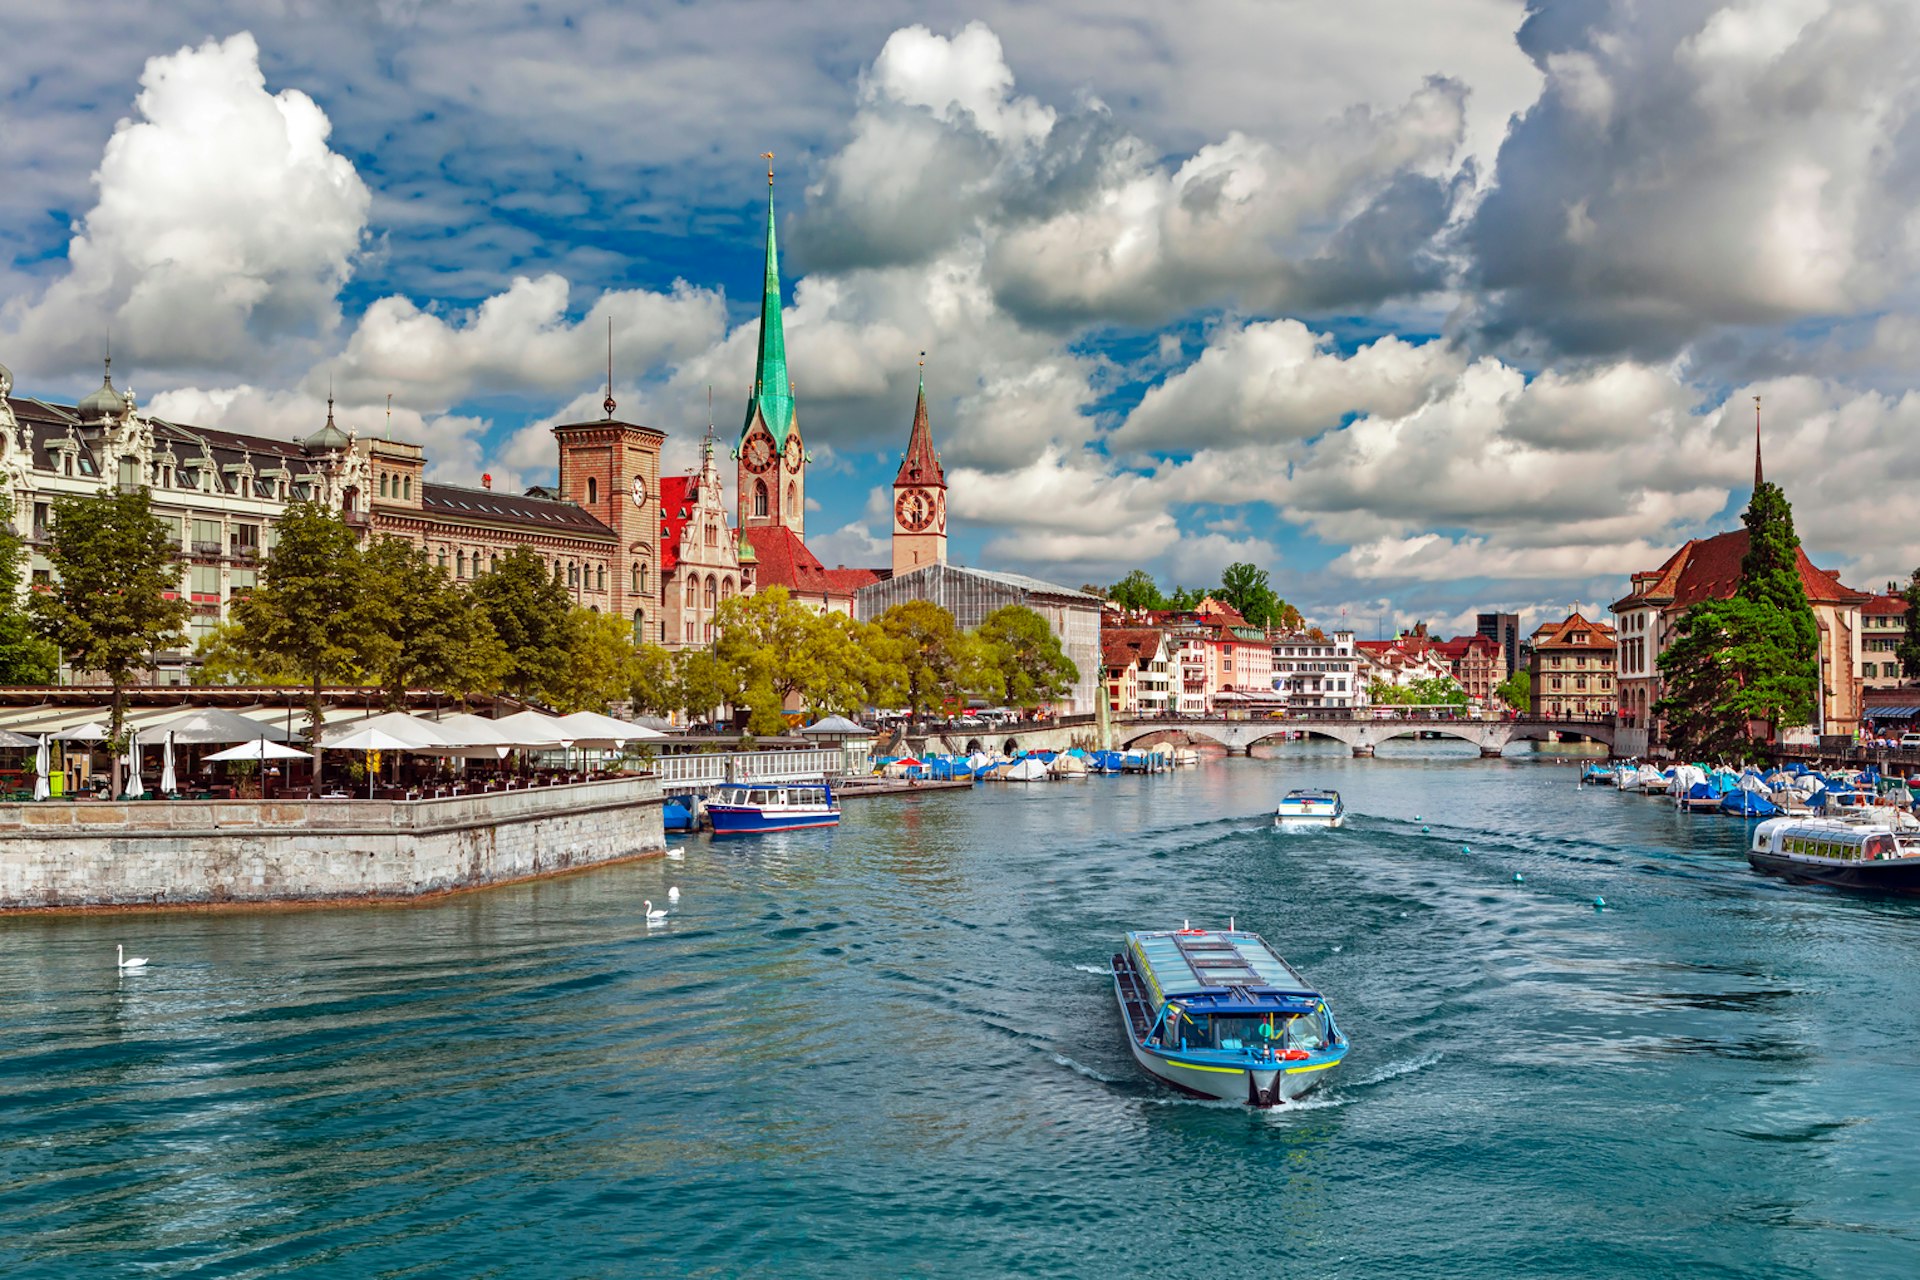 A boat sails along a river in a city. The skyline is dominated by two large church steeples